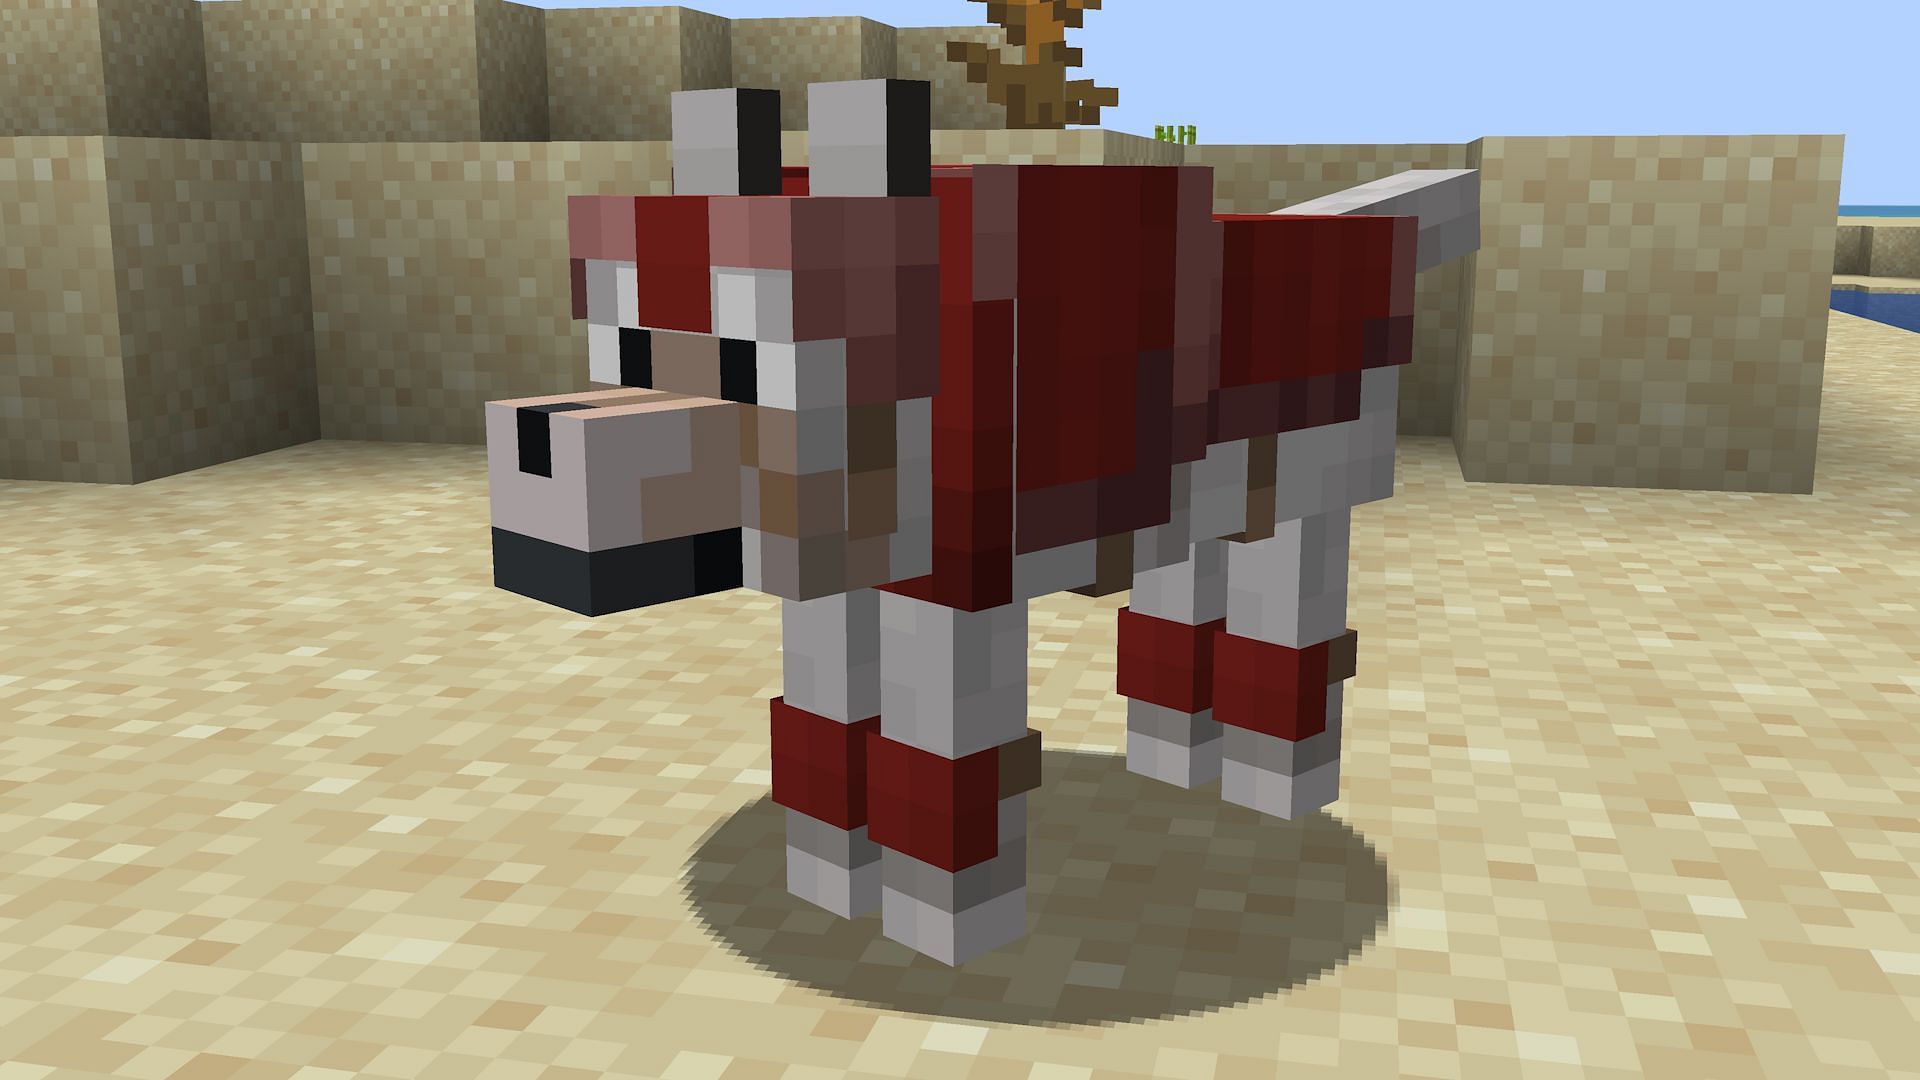 Wolves will be staple adventuring partners thanks to the wolf armor from  Armored Paws (Image via Mojang)